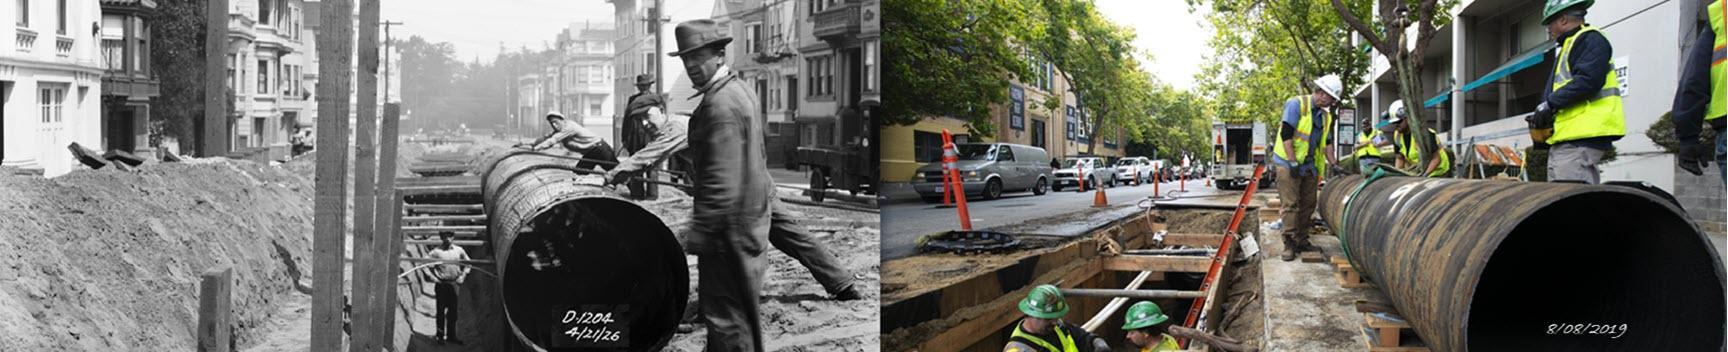 Replacing water mains in 1926 and 2019